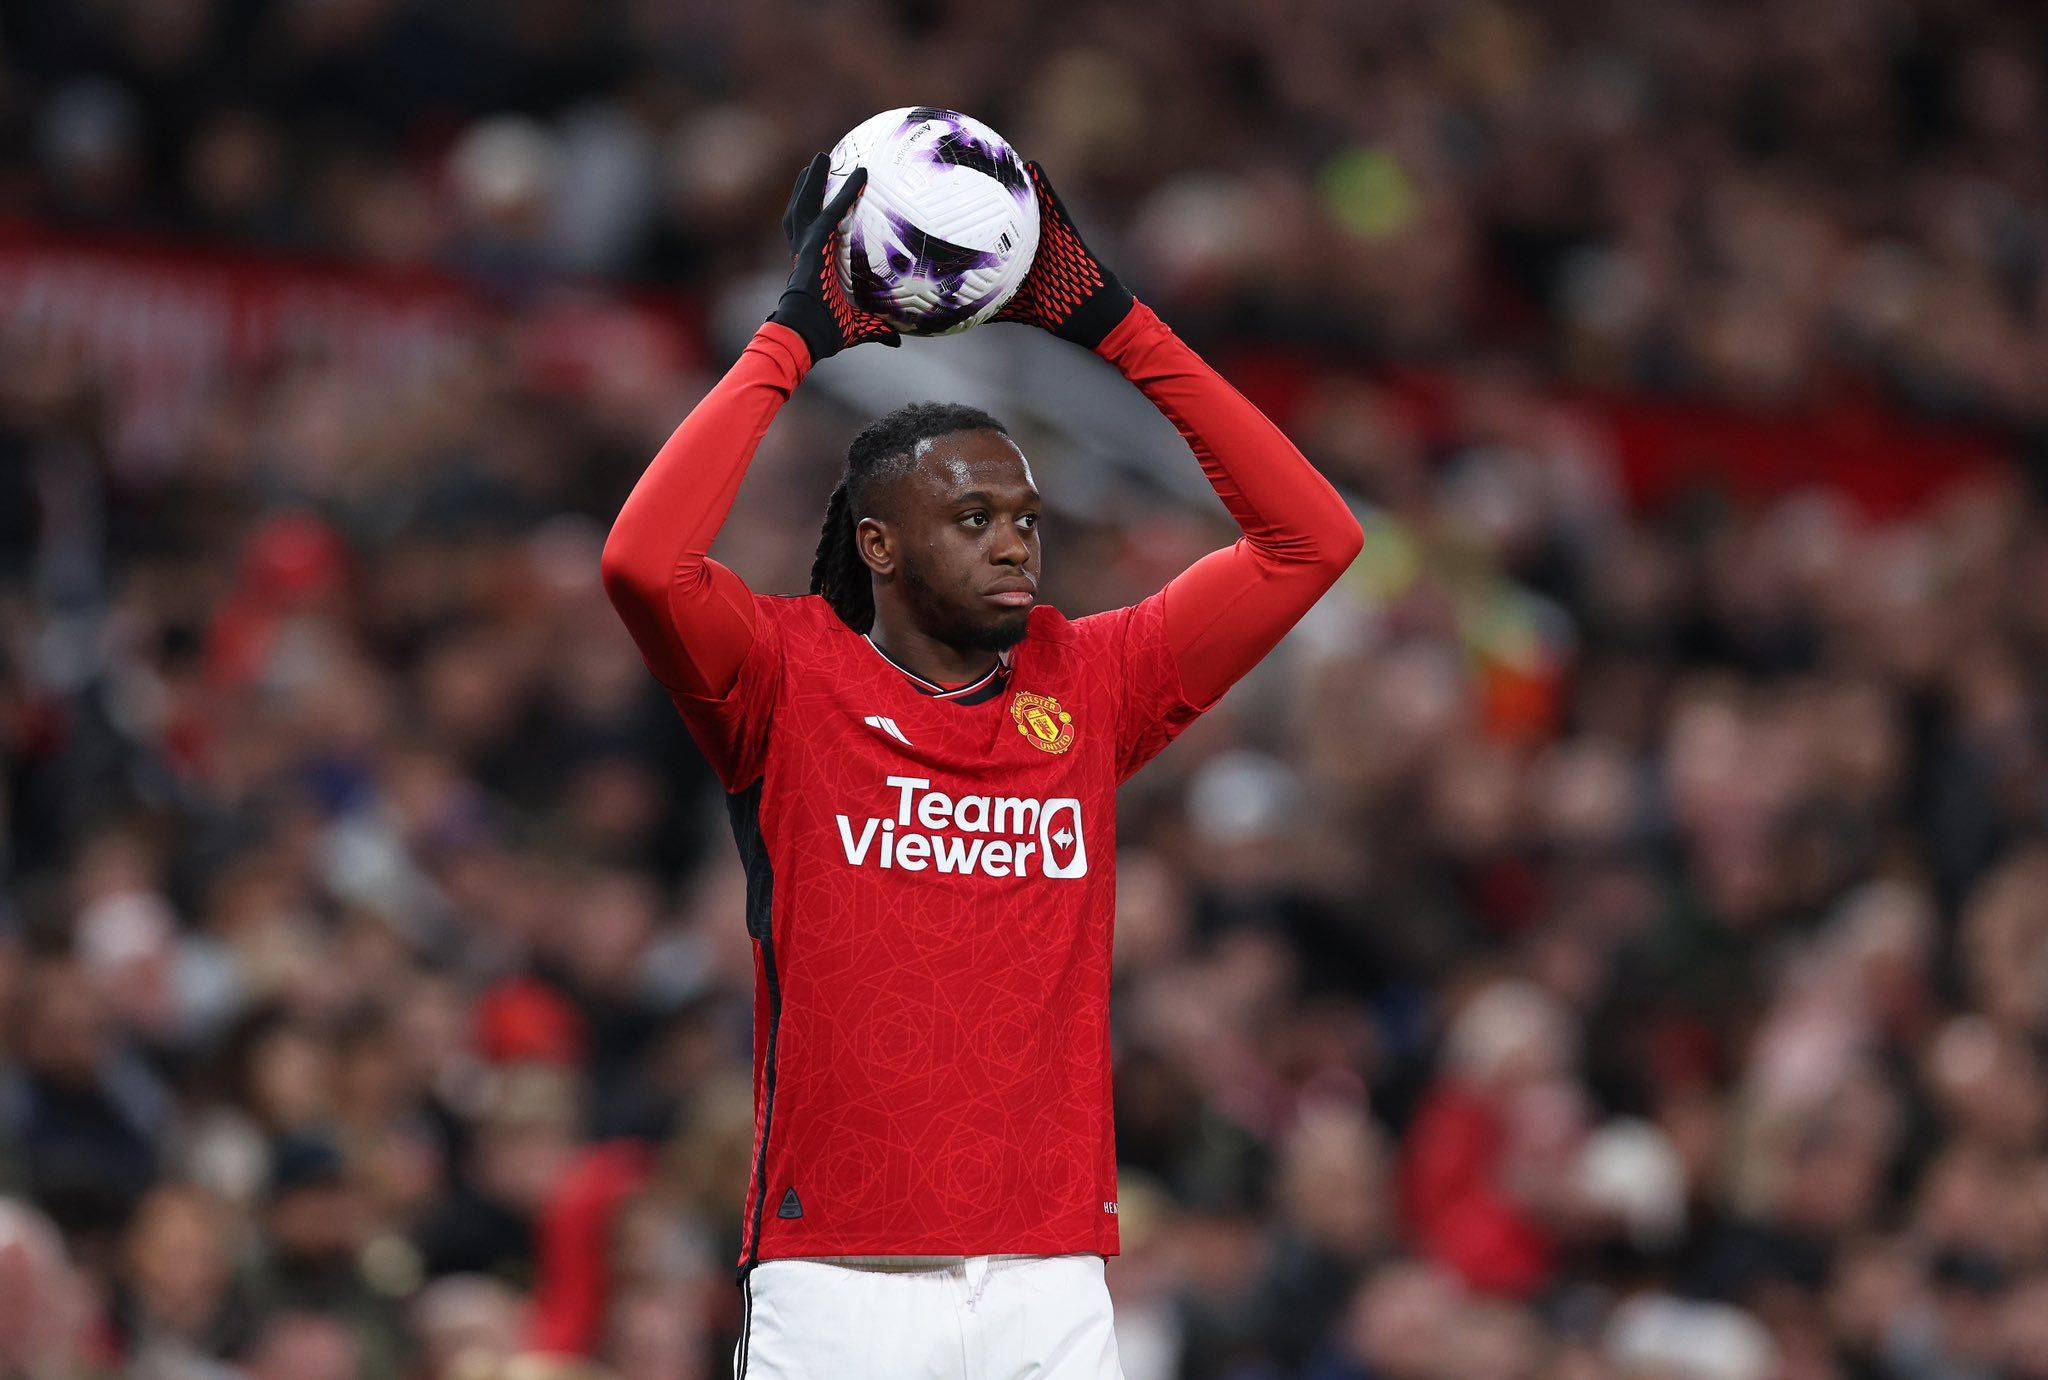 Romano: Wan-Bissaka could leave Manchester United if good offer arrives in summer, interest from Premier League and Serie A clubs